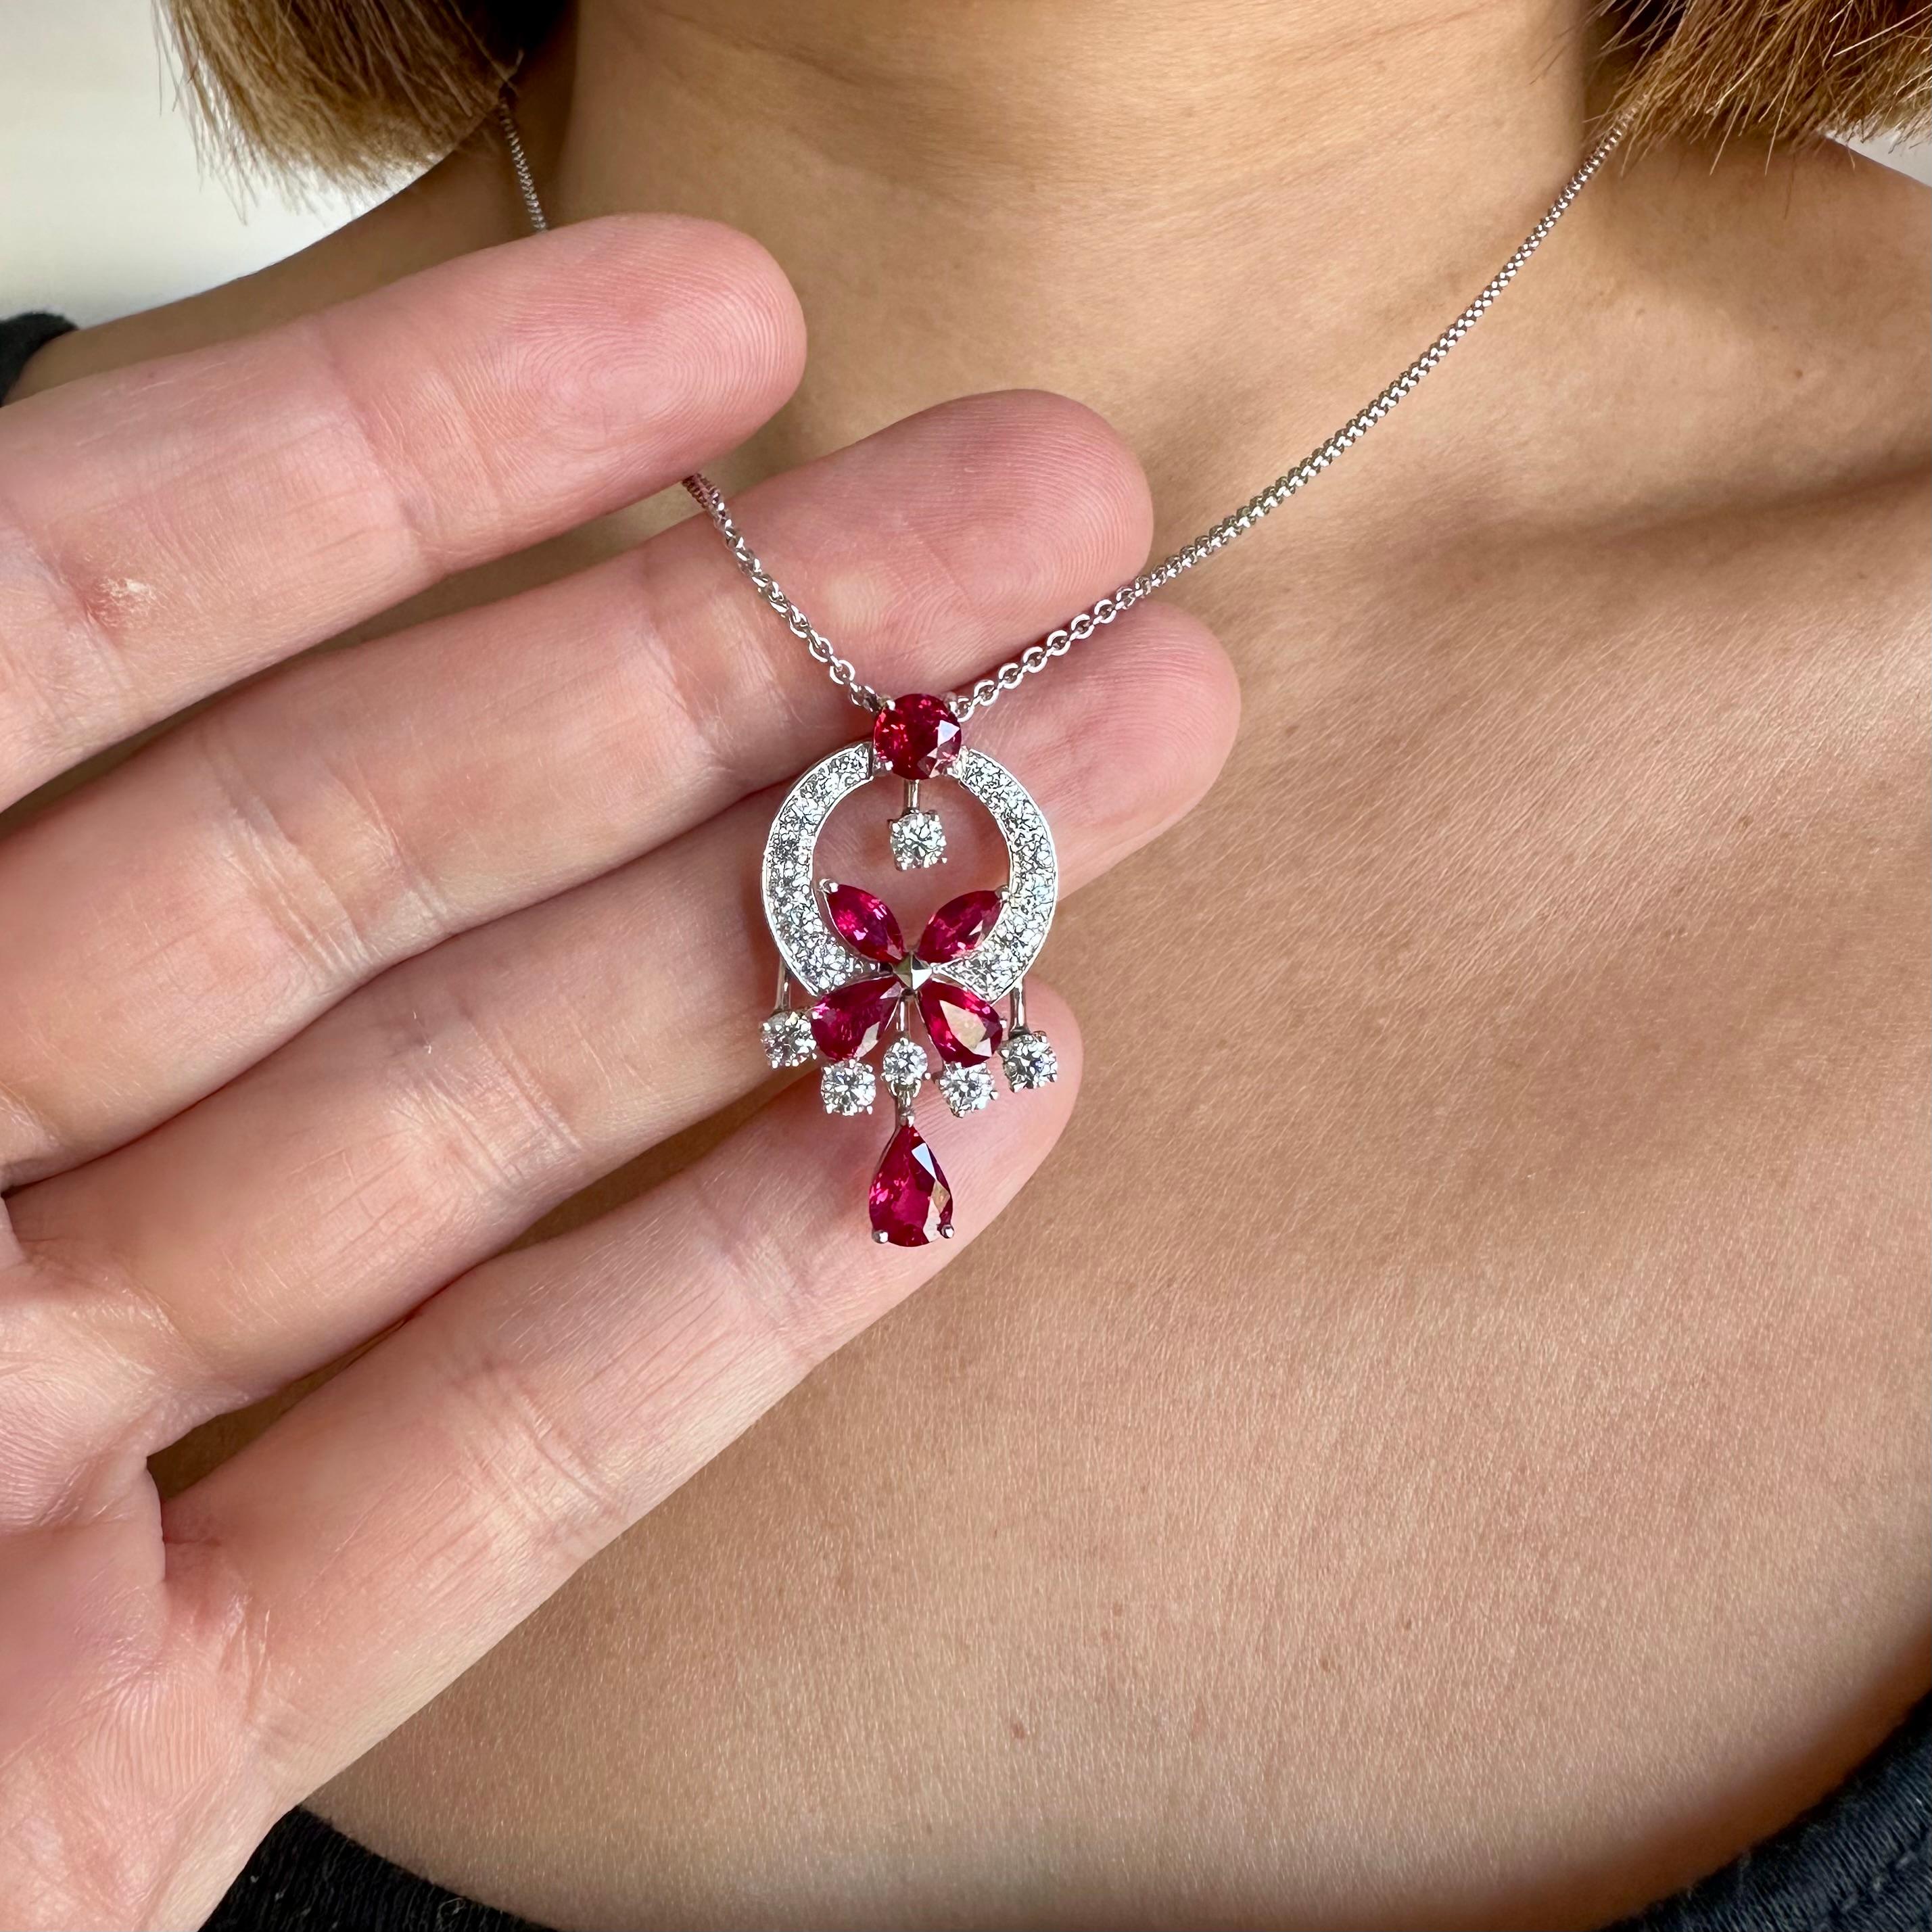 By Lawrence Graff 
Classic butterfly Necklace with Ruby and Diamond Pendant Necklace.  18 karat white gold. Diamonds 1.28 cts  
Ruby is 2.83 cts  
The pendant comes on a Signed Graff 18 k White Gold 17 inch Chain. 
Dimensions: length is 1.25 by